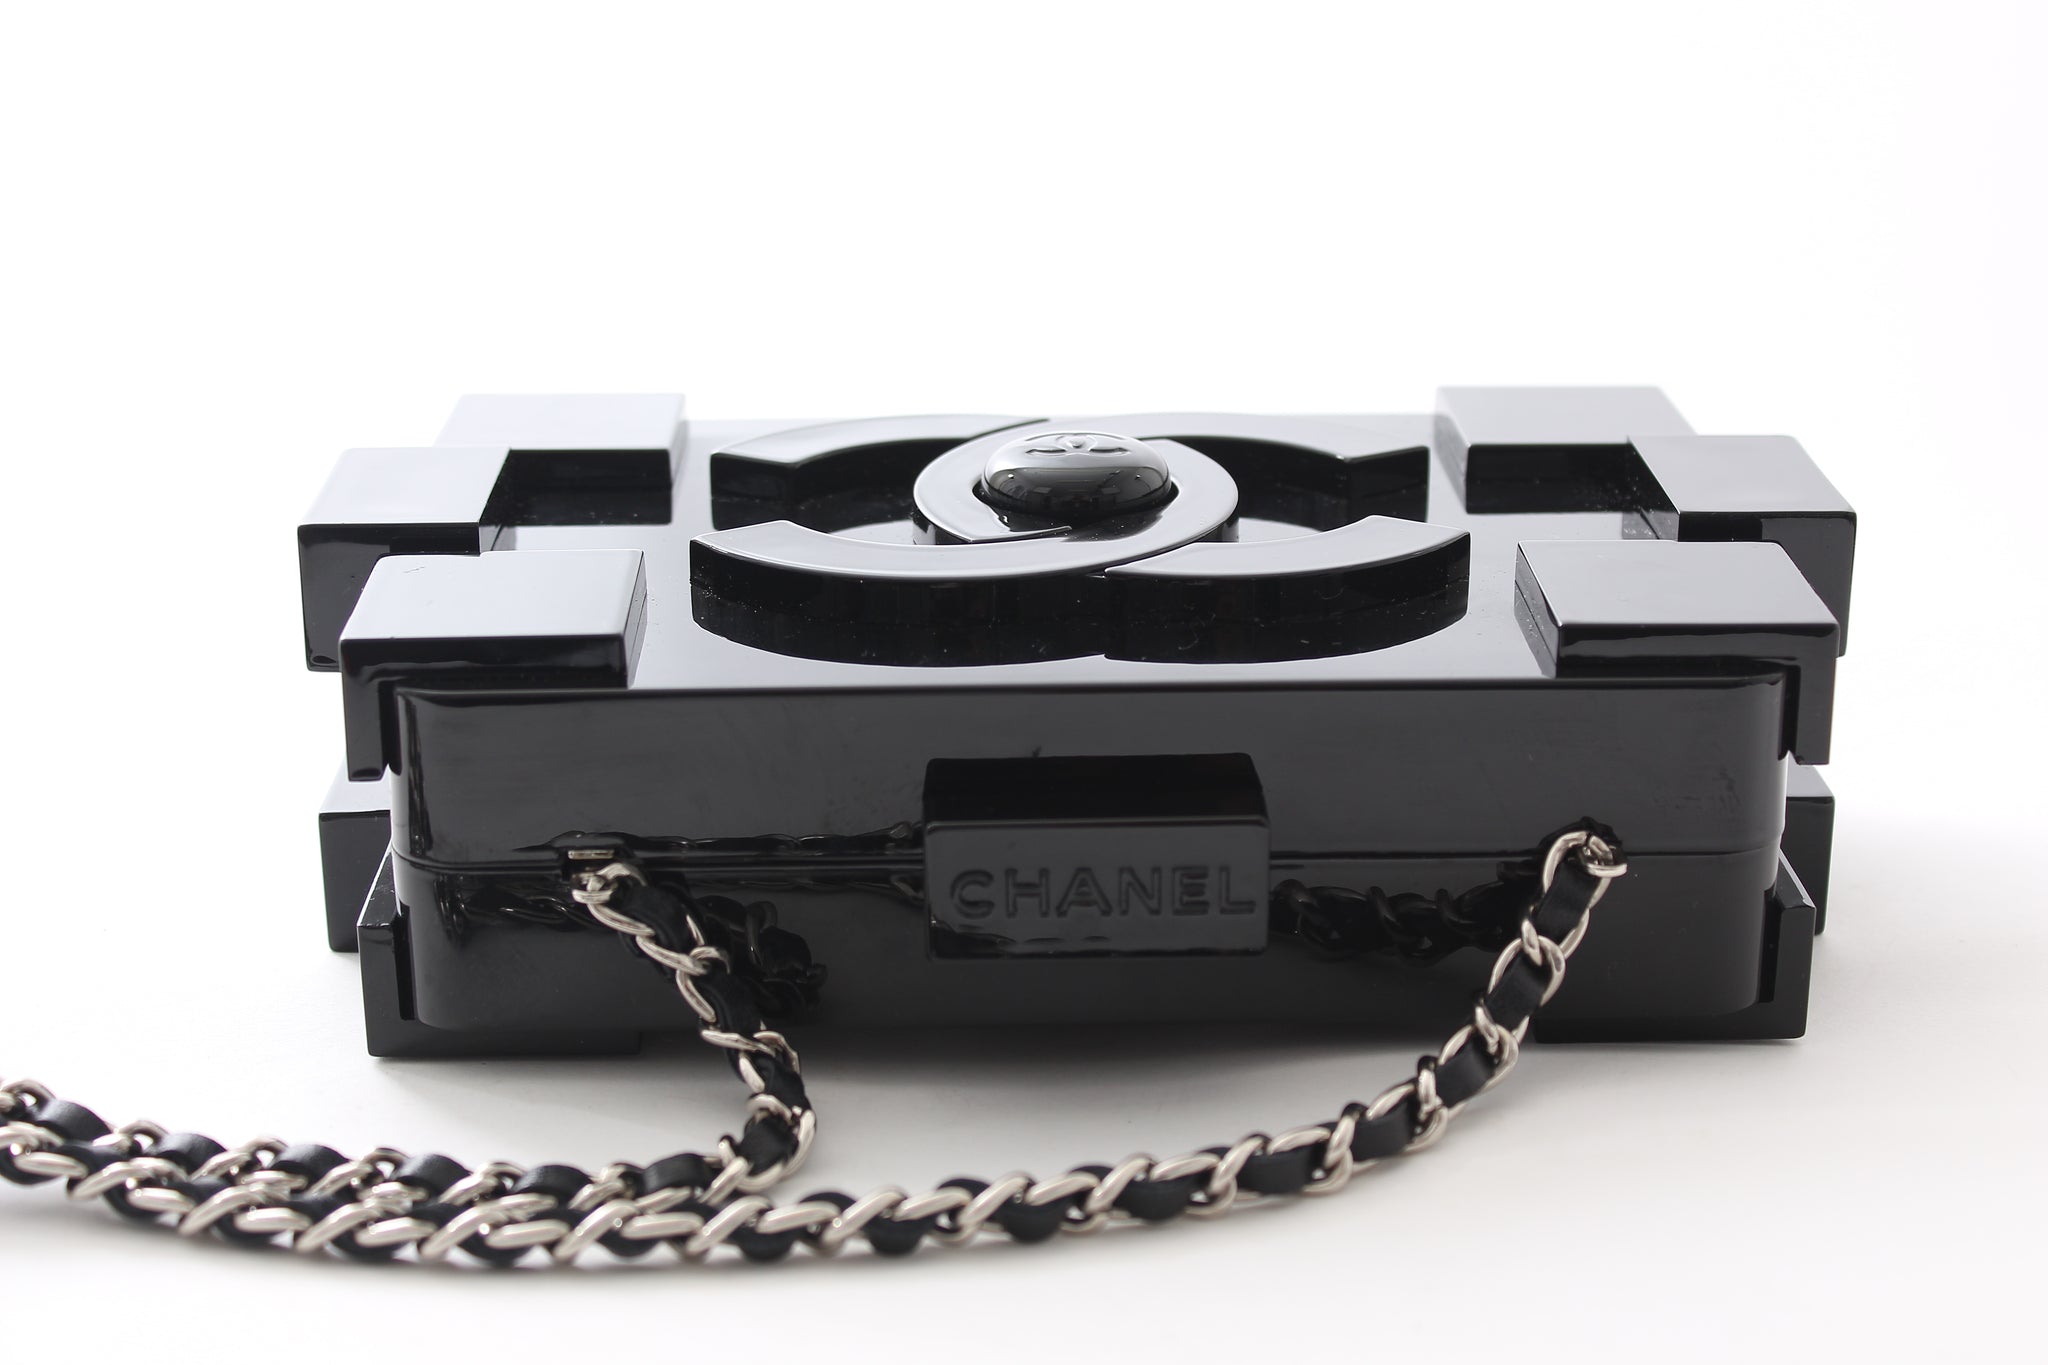 Chanel's 'Lego' bag — it's £5,000 and it's sold out